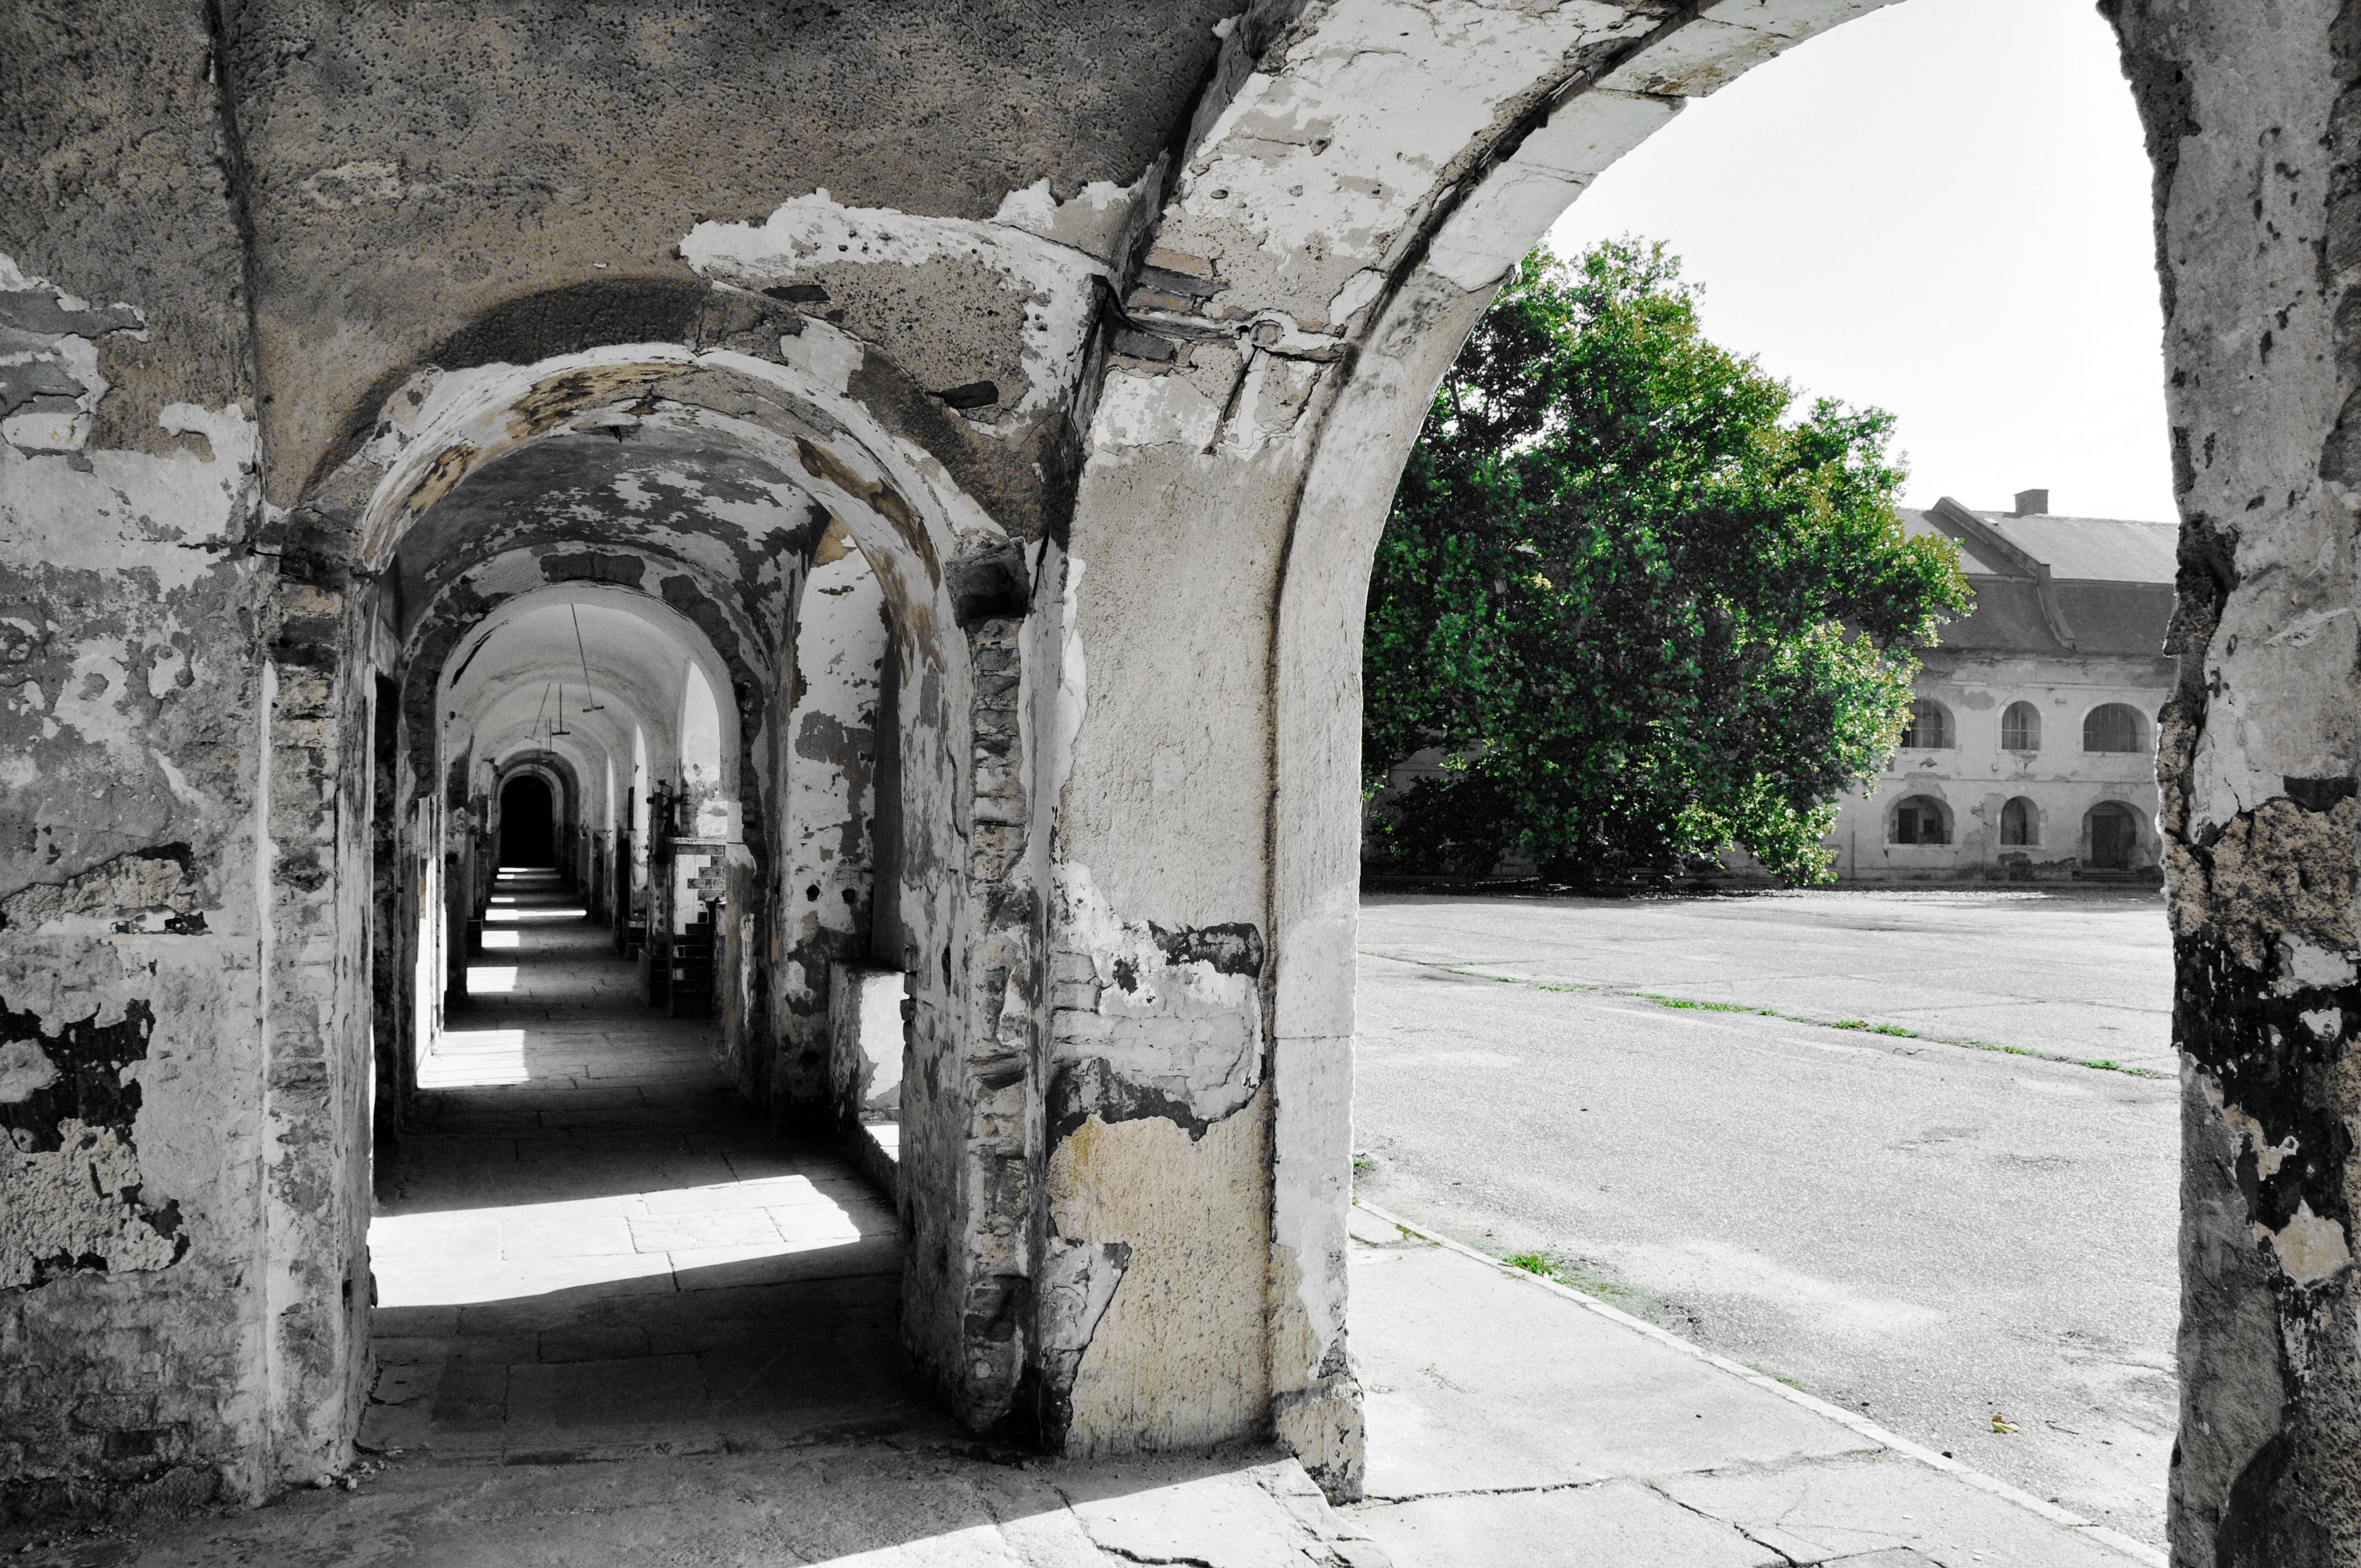 General 4288x2848 architecture old building ruins abandoned Slovakia history arch trees sunlight shadow monastery town square selective coloring